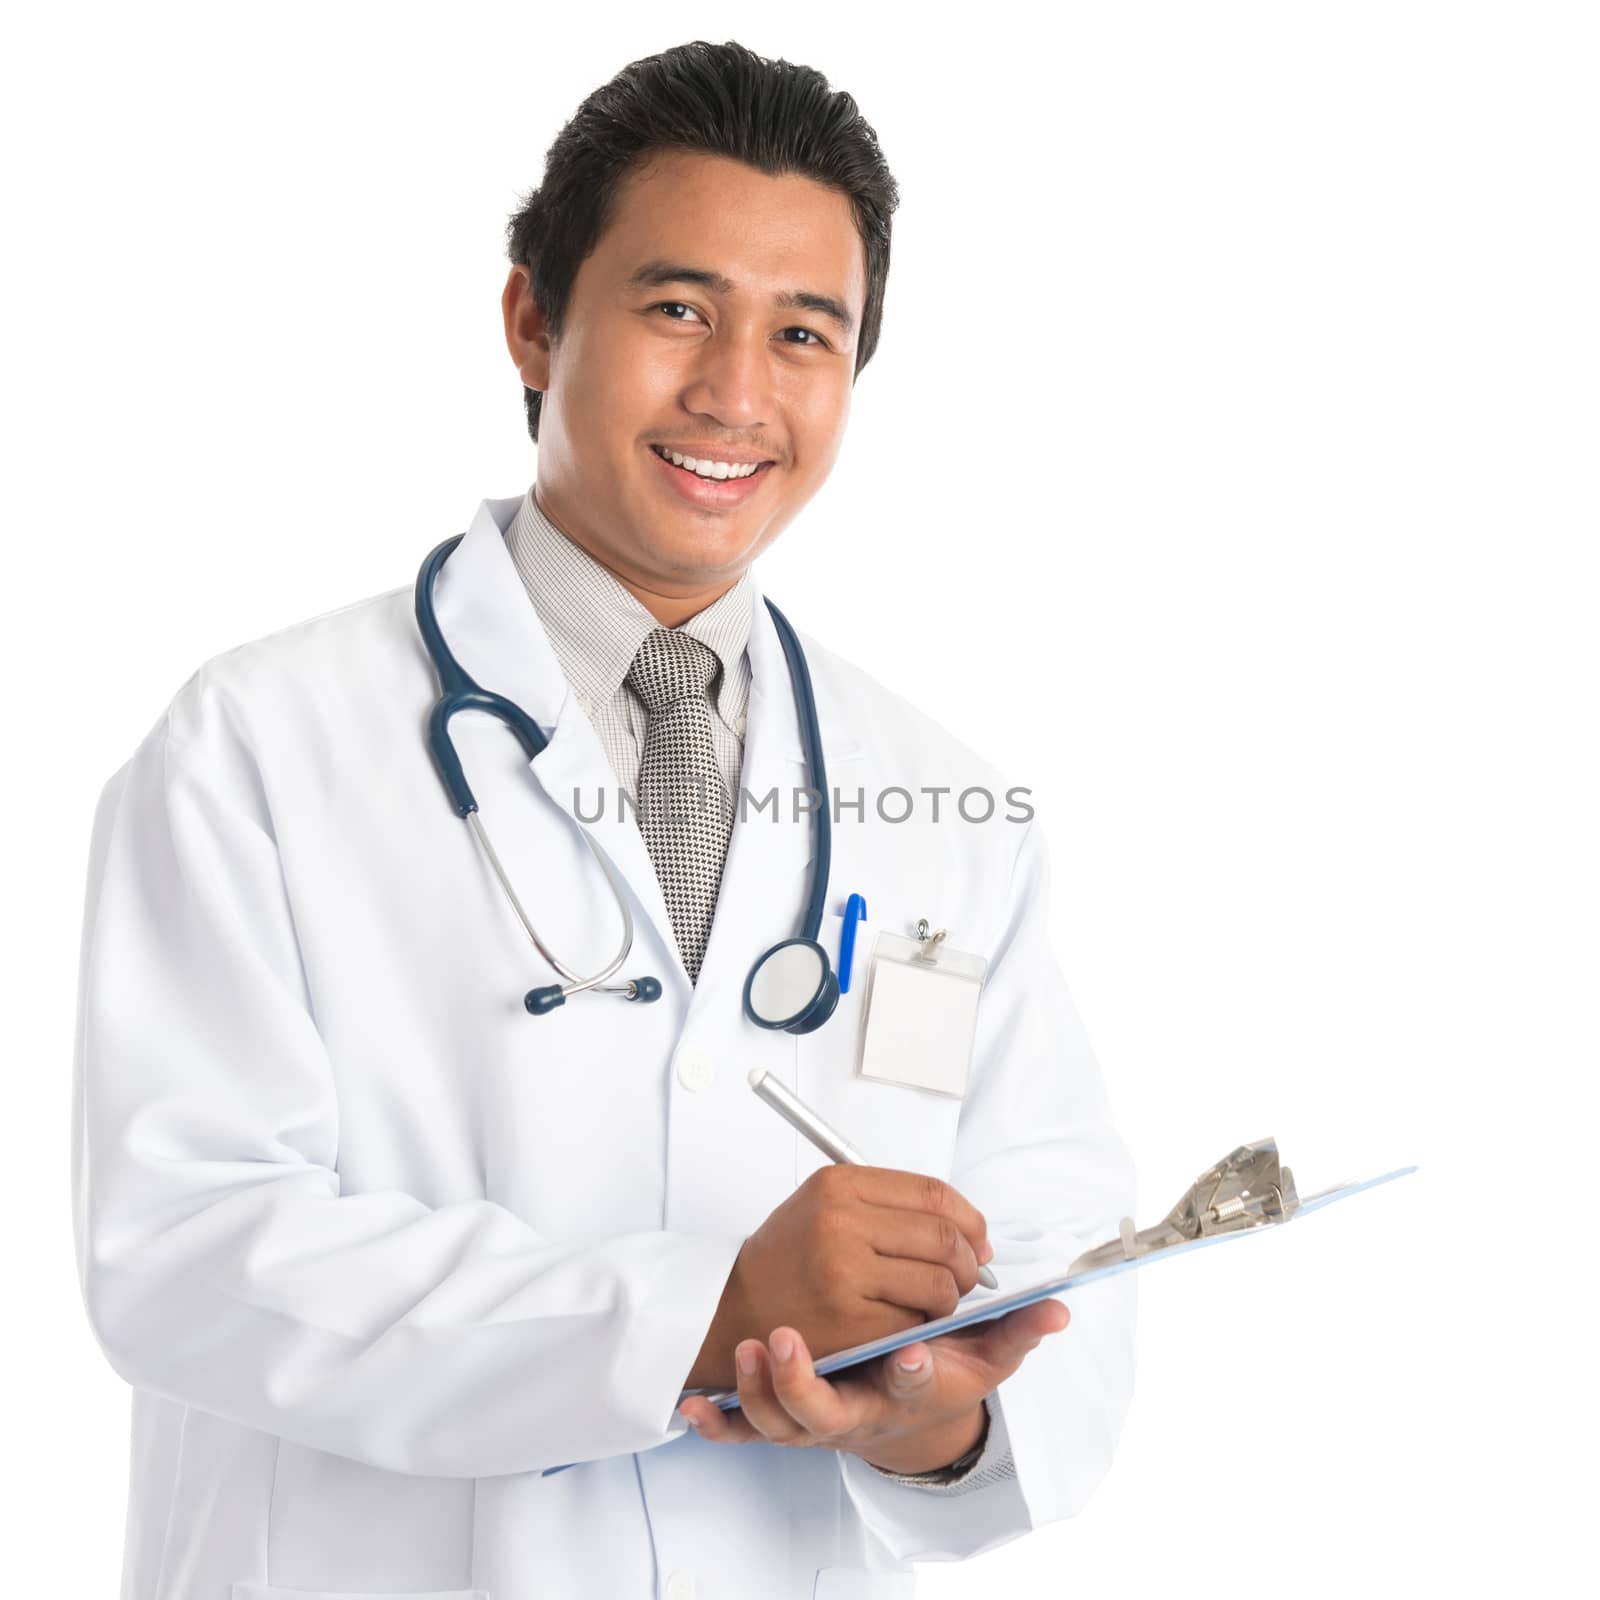 Portrait of southeast Asian male doctor writing medical report, standing isolated on white background. Young man model.